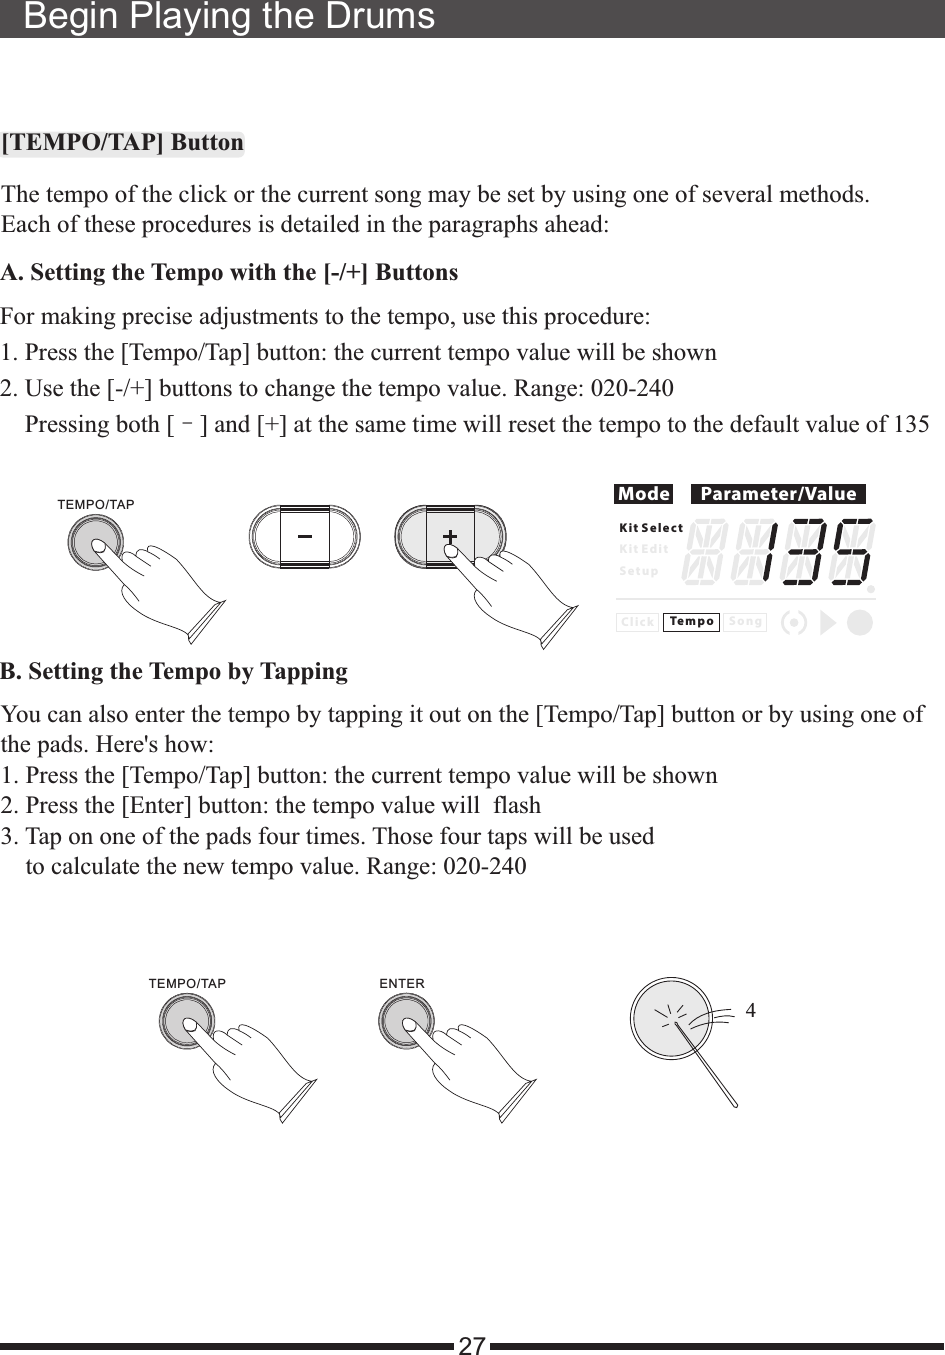 27[TEMPO/TAP] ButtonThe tempo of the click or the current song may be set by using one of several methods.Each of these procedures is detailed in the paragraphs ahead:A. Setting the Tempo with the [-/+] ButtonsFor making precise adjustments to the tempo, use this procedure:1. Press the [Tempo/Tap] button: the current tempo value will be shown2. Use the [-/+] buttons to change the tempo value. Range: 020-240    Pressing both [–] and [+] at the same time will reset the tempo to the default value of 135B. Setting the Tempo by TappingYou can also enter the tempo by tapping it out on the [Tempo/Tap] button or by using one ofthe pads. Here s how:1. Press the [Tempo/Tap] button: the current tempo value will be shown2. 3. Tap on one of the pads four times. Those four taps will be used     to calculate the new tempo value. Range: 020-240&apos;Press the [Enter] button: the tempo value will  flashMode Parameter/ValueK i t S e l e c tK i t E d i tS e t u pC l i c k S o n gTe m p oBegin Playing the DrumsTEMPO/TAPTEMPO/TAP ENTER4